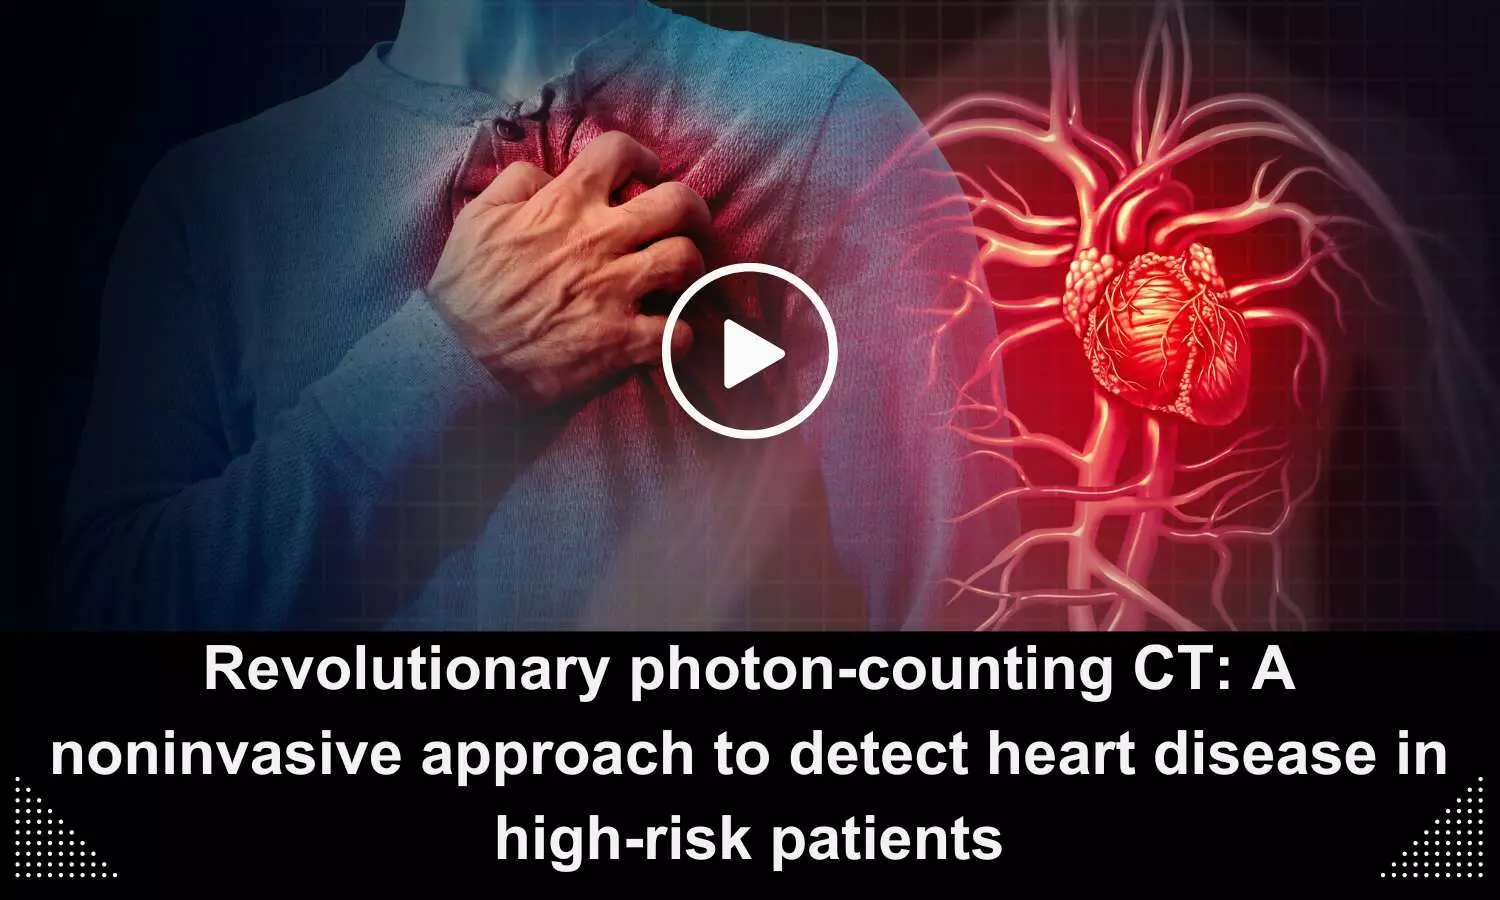 Revolutionary photon-counting CT: A noninvasive approach to detect heart disease in high-risk patients